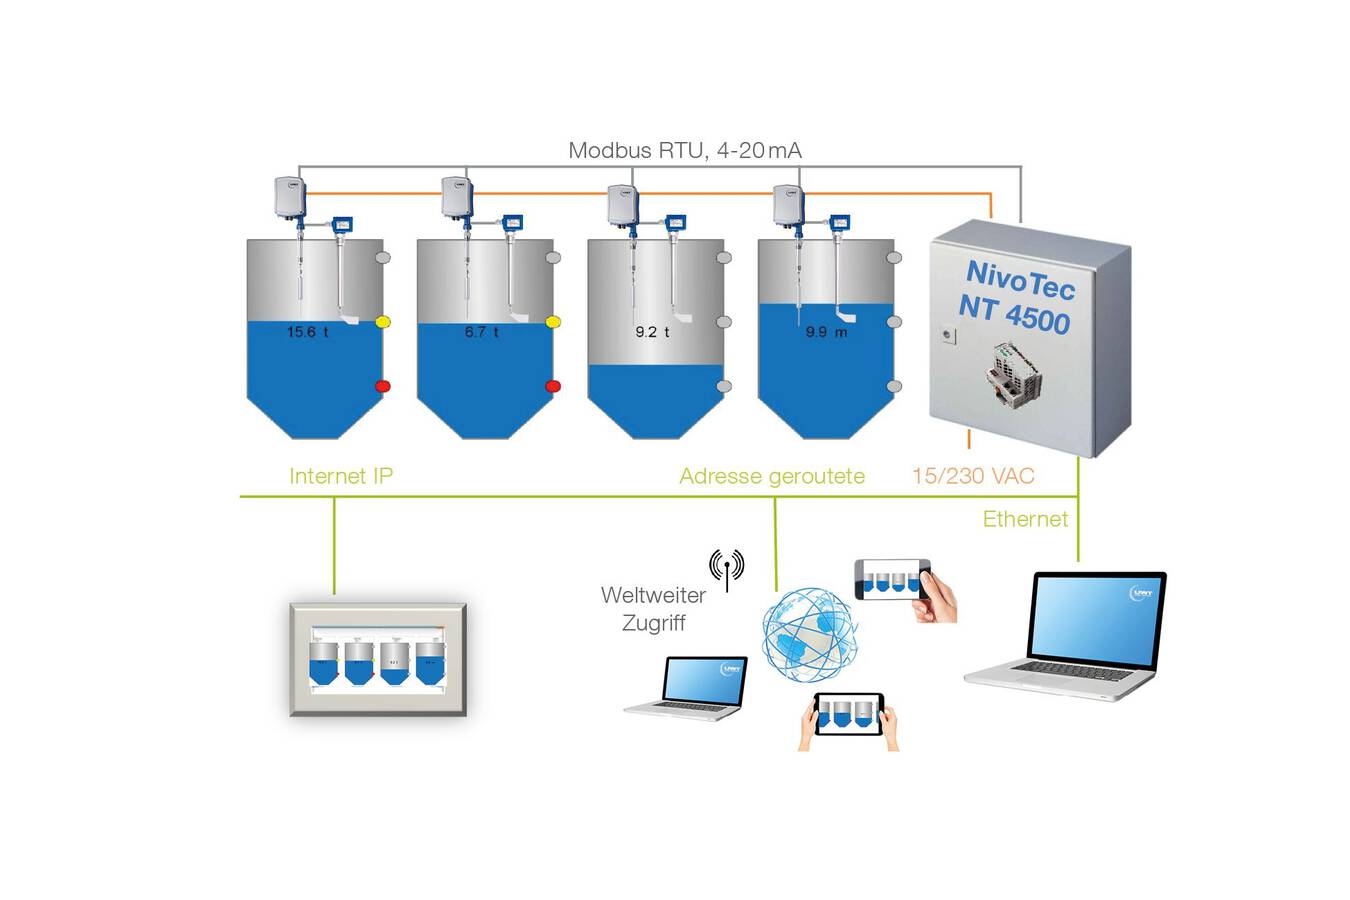 Silo management with NivoTec® for grain mills and their customers Bakeries, the customers of the mills, often place their orders to late and the mills are faced with having to supply material immediately in order to avoid production stop at the bakeries.